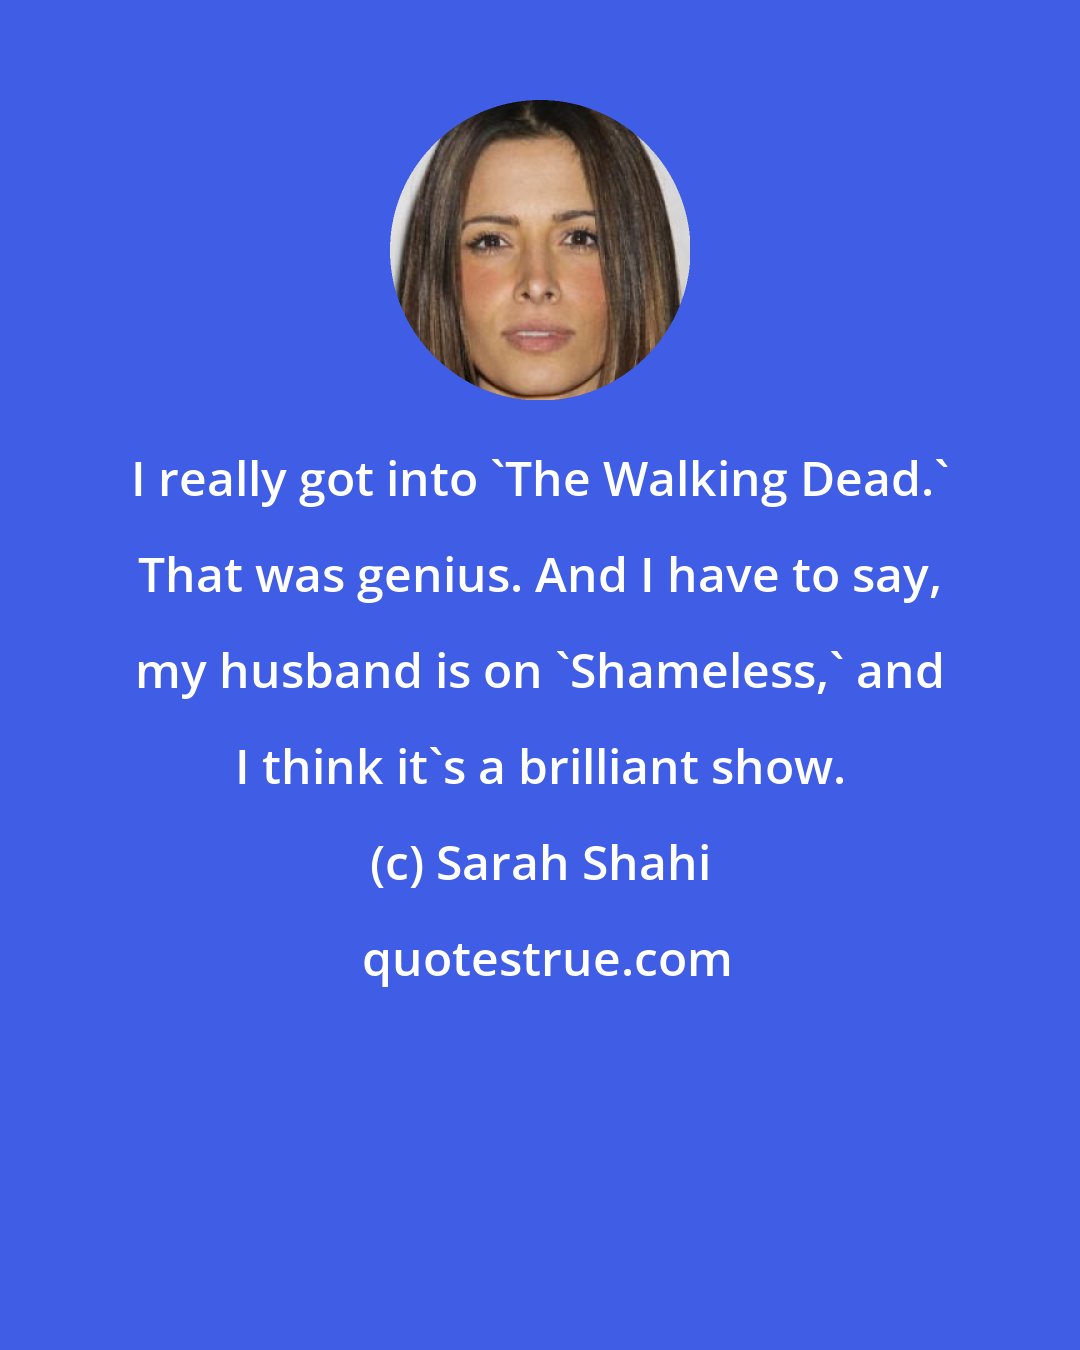 Sarah Shahi: I really got into 'The Walking Dead.' That was genius. And I have to say, my husband is on 'Shameless,' and I think it's a brilliant show.